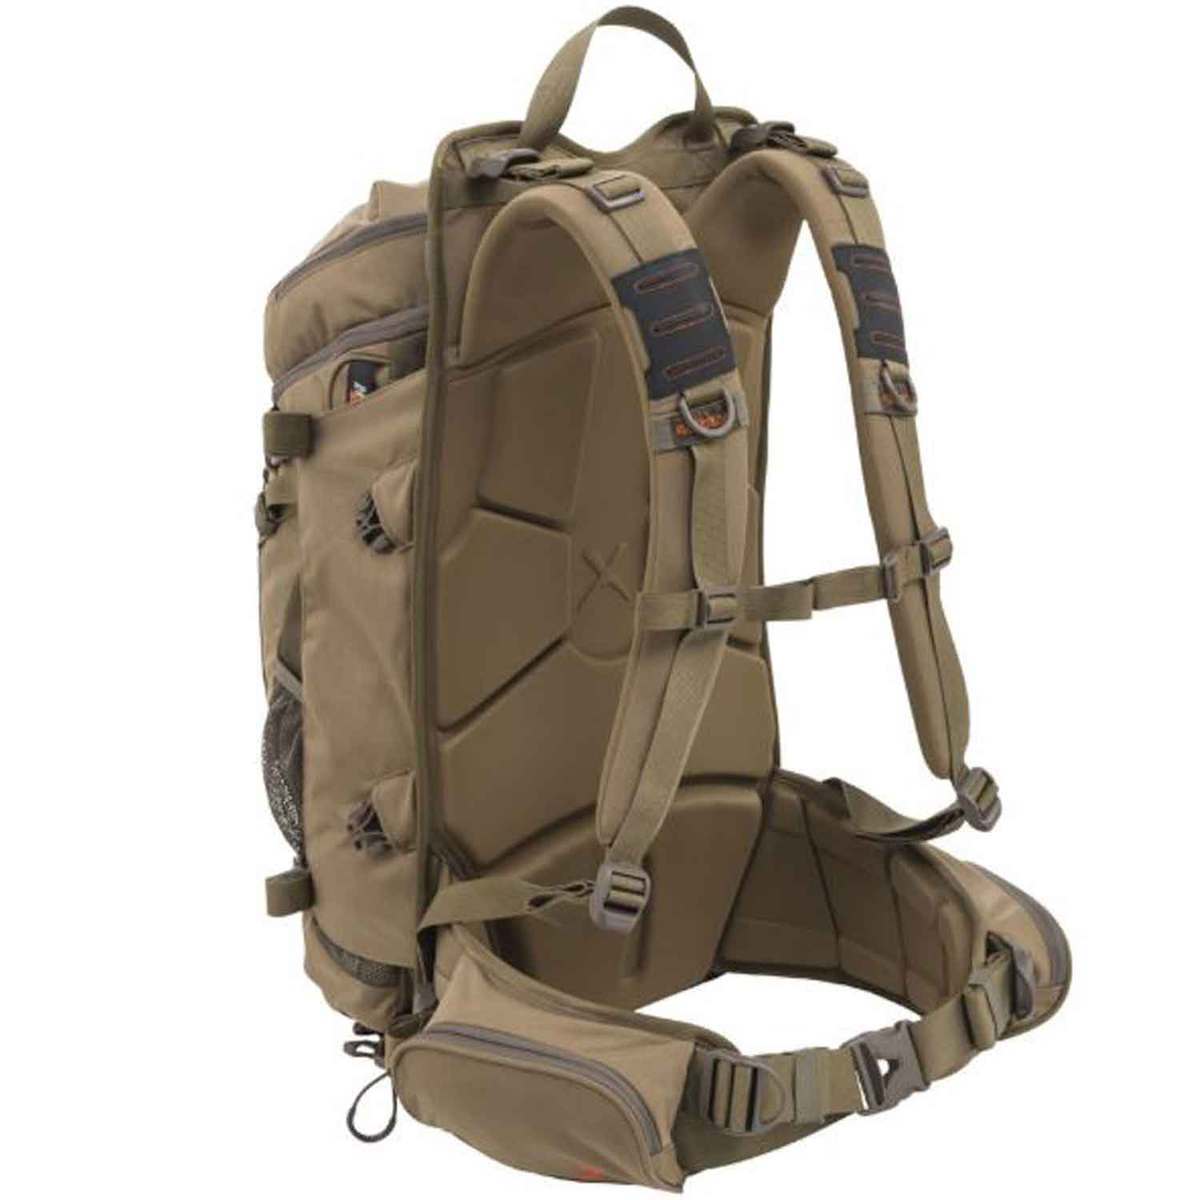 ALPS Outdoorz Hybrid X 45 Liter Day Pack - Coyote Brown - Coyote Brown ...